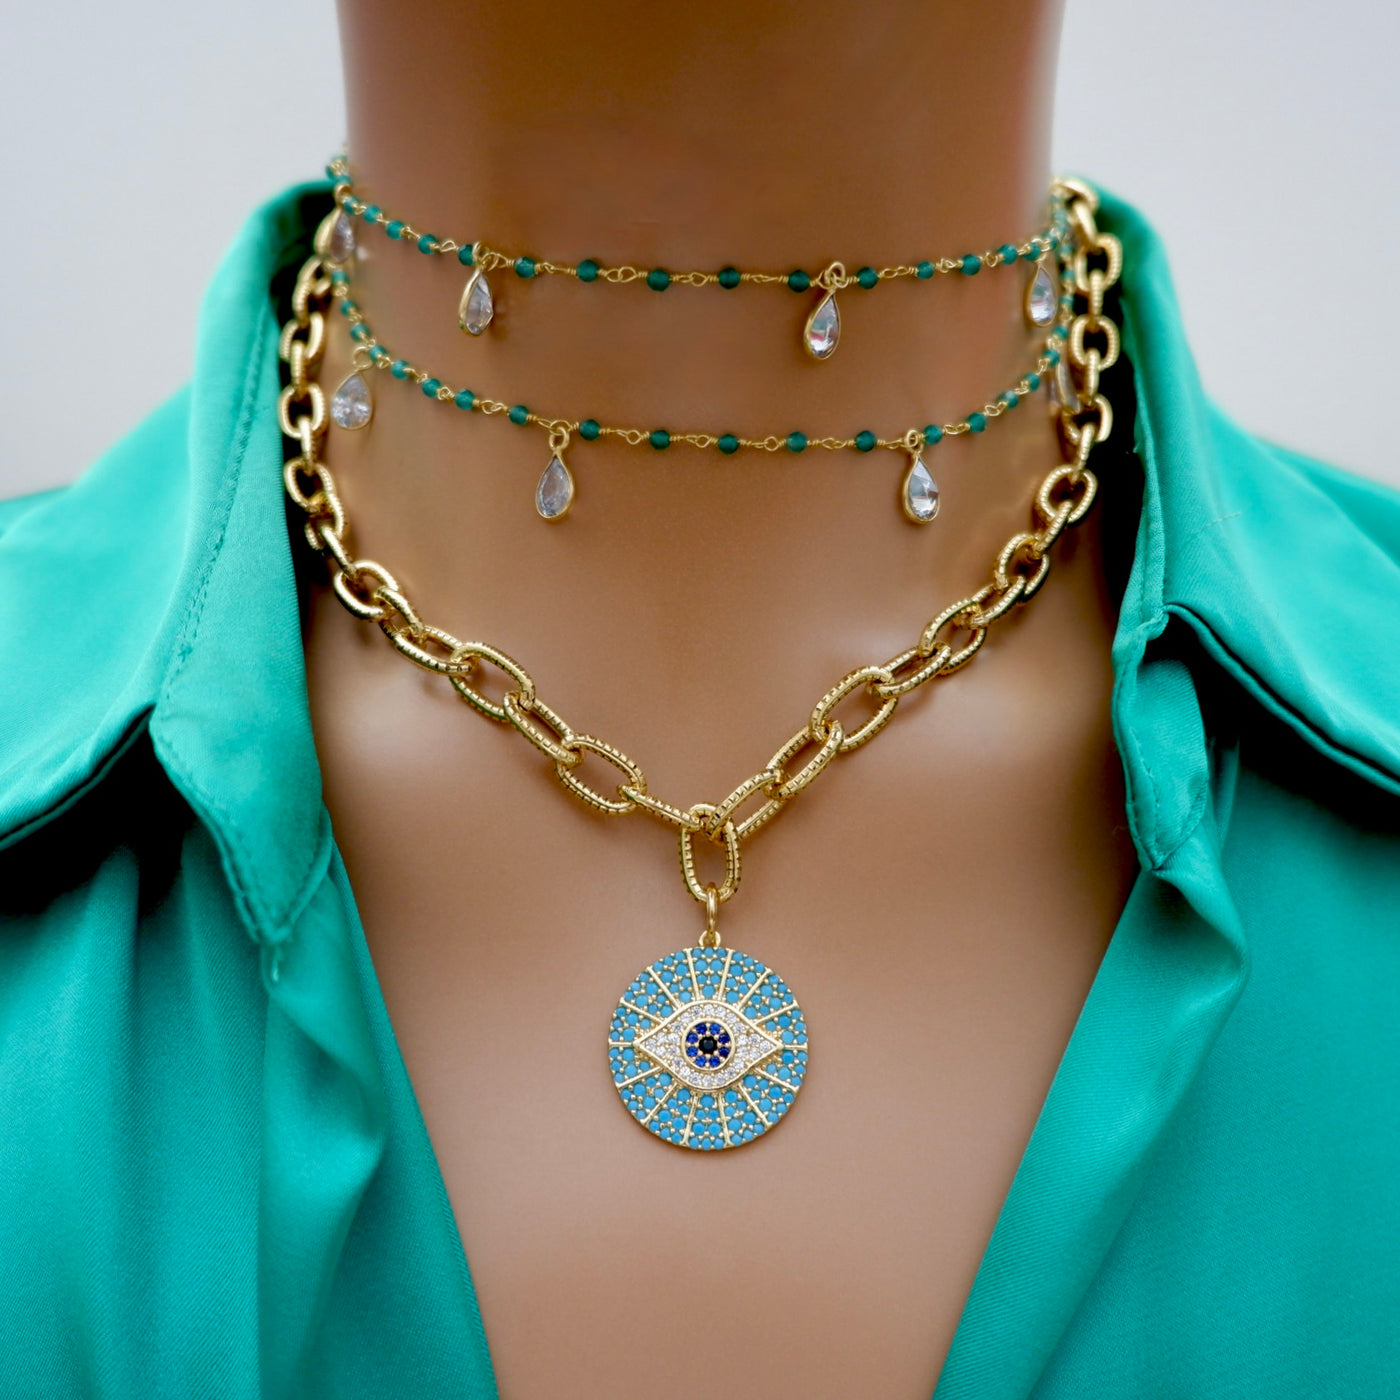 my giant turquoise evil eye necklace